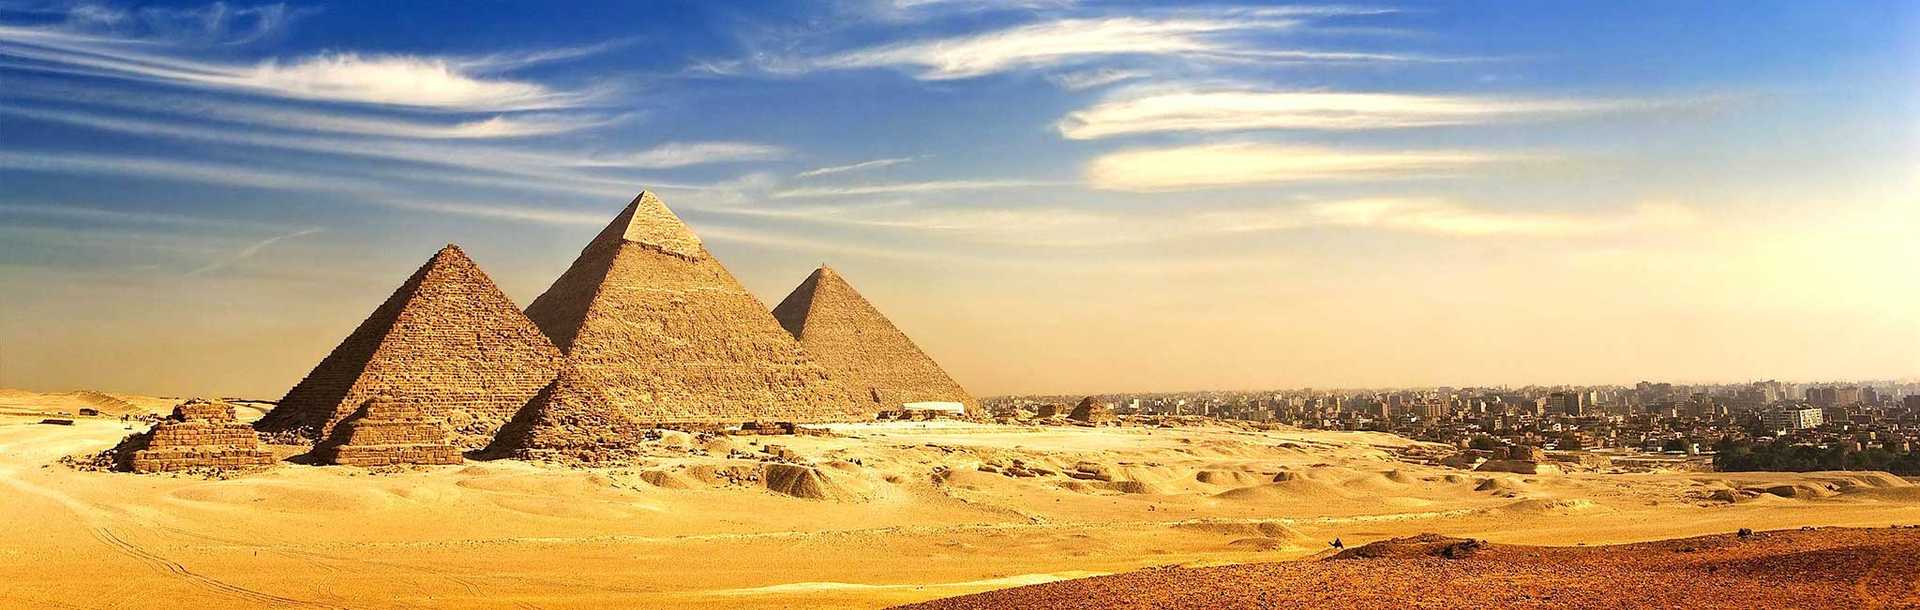 Distant view of the Great Pyramids of Giza in Egypt.